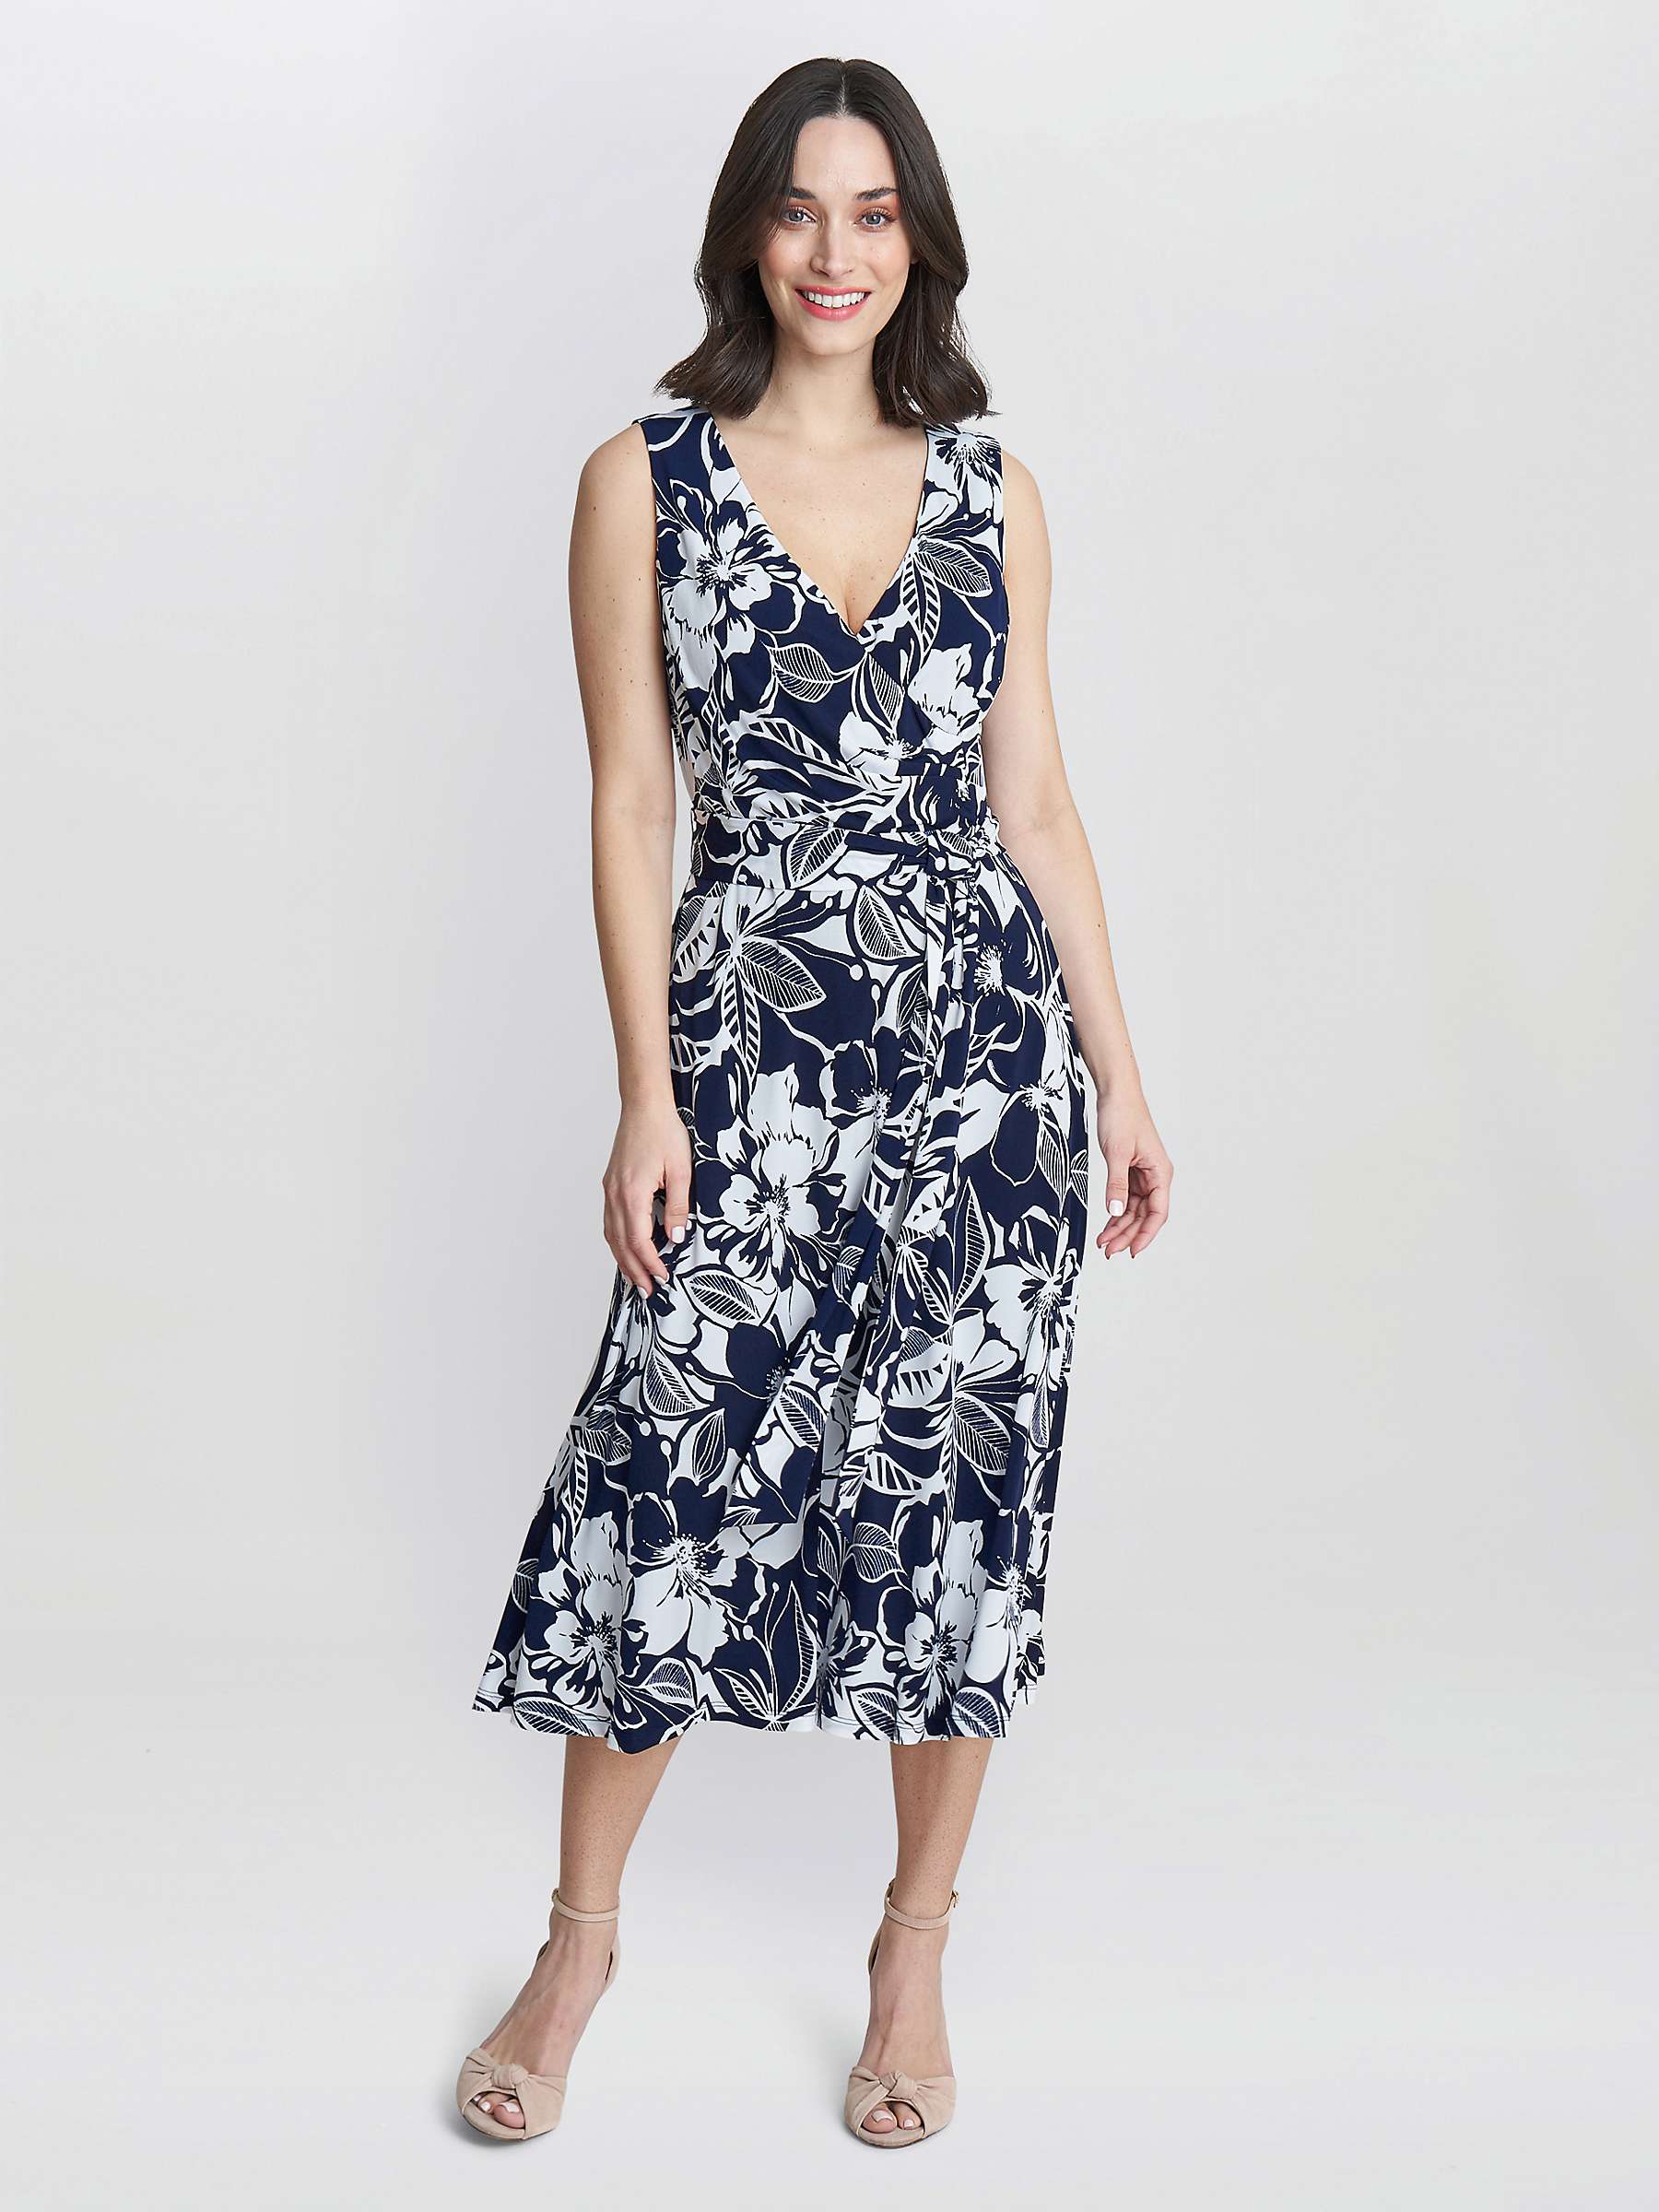 Buy Gina Bacconi Denise Fit And Flare Jersey Dress, Navy/White Online at johnlewis.com